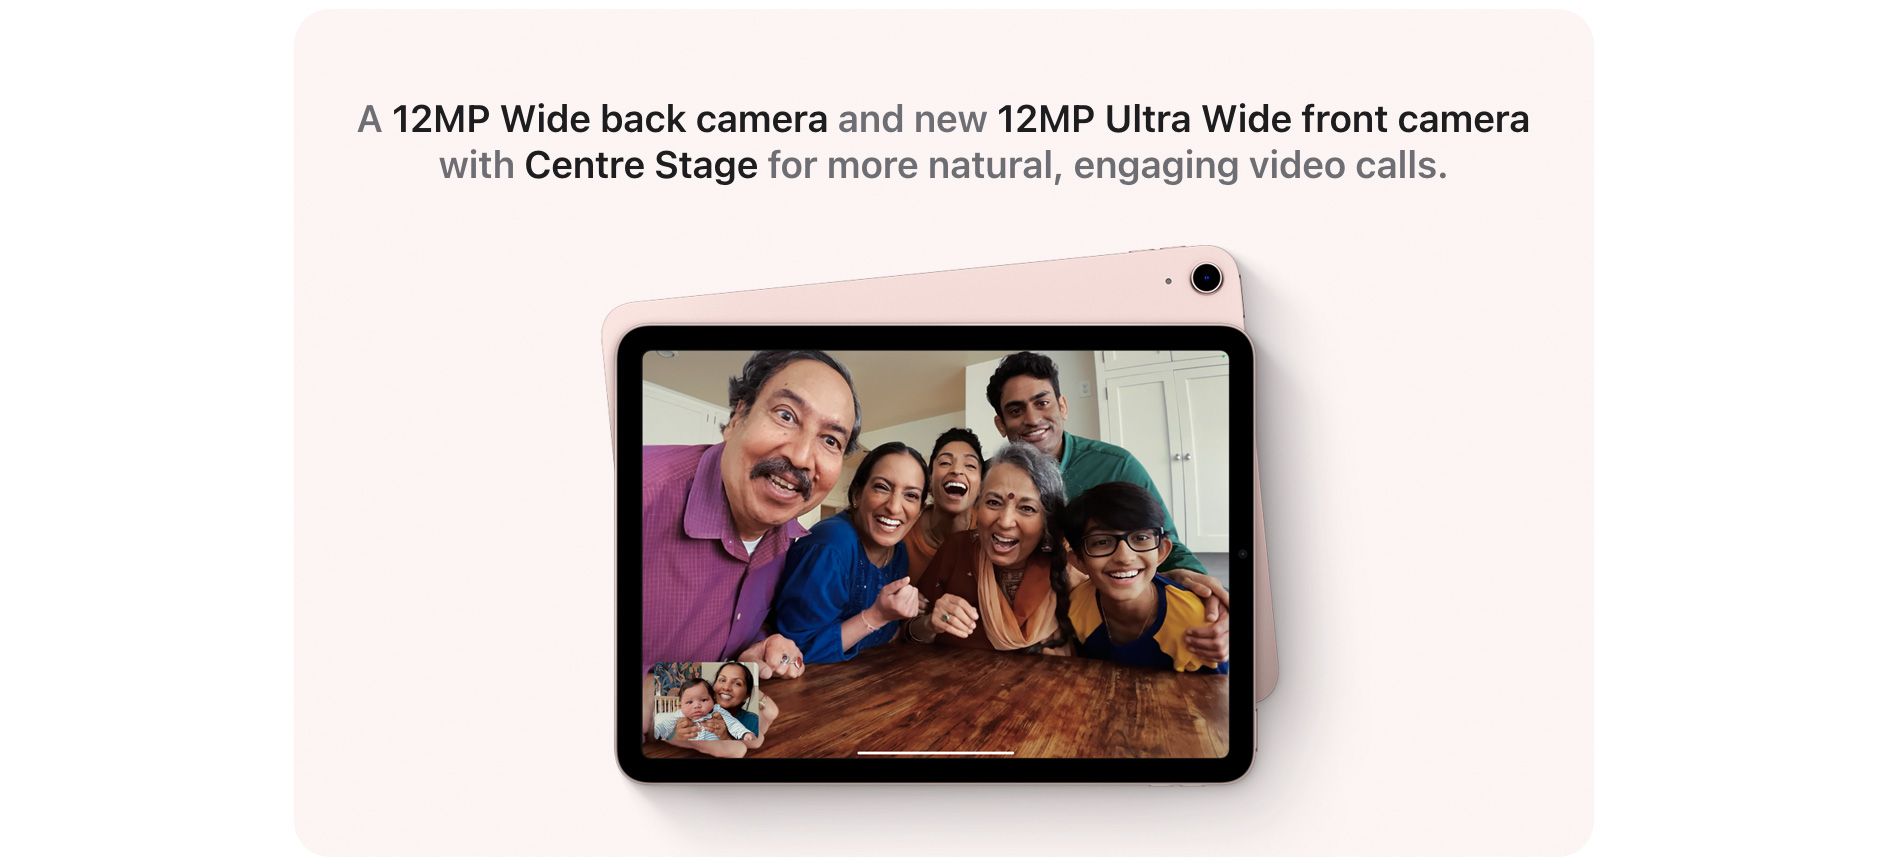 A 12MP Wide back camera and new 12MP Ultra Wide front camera with Centre Stage for more natural, engaging video calls.